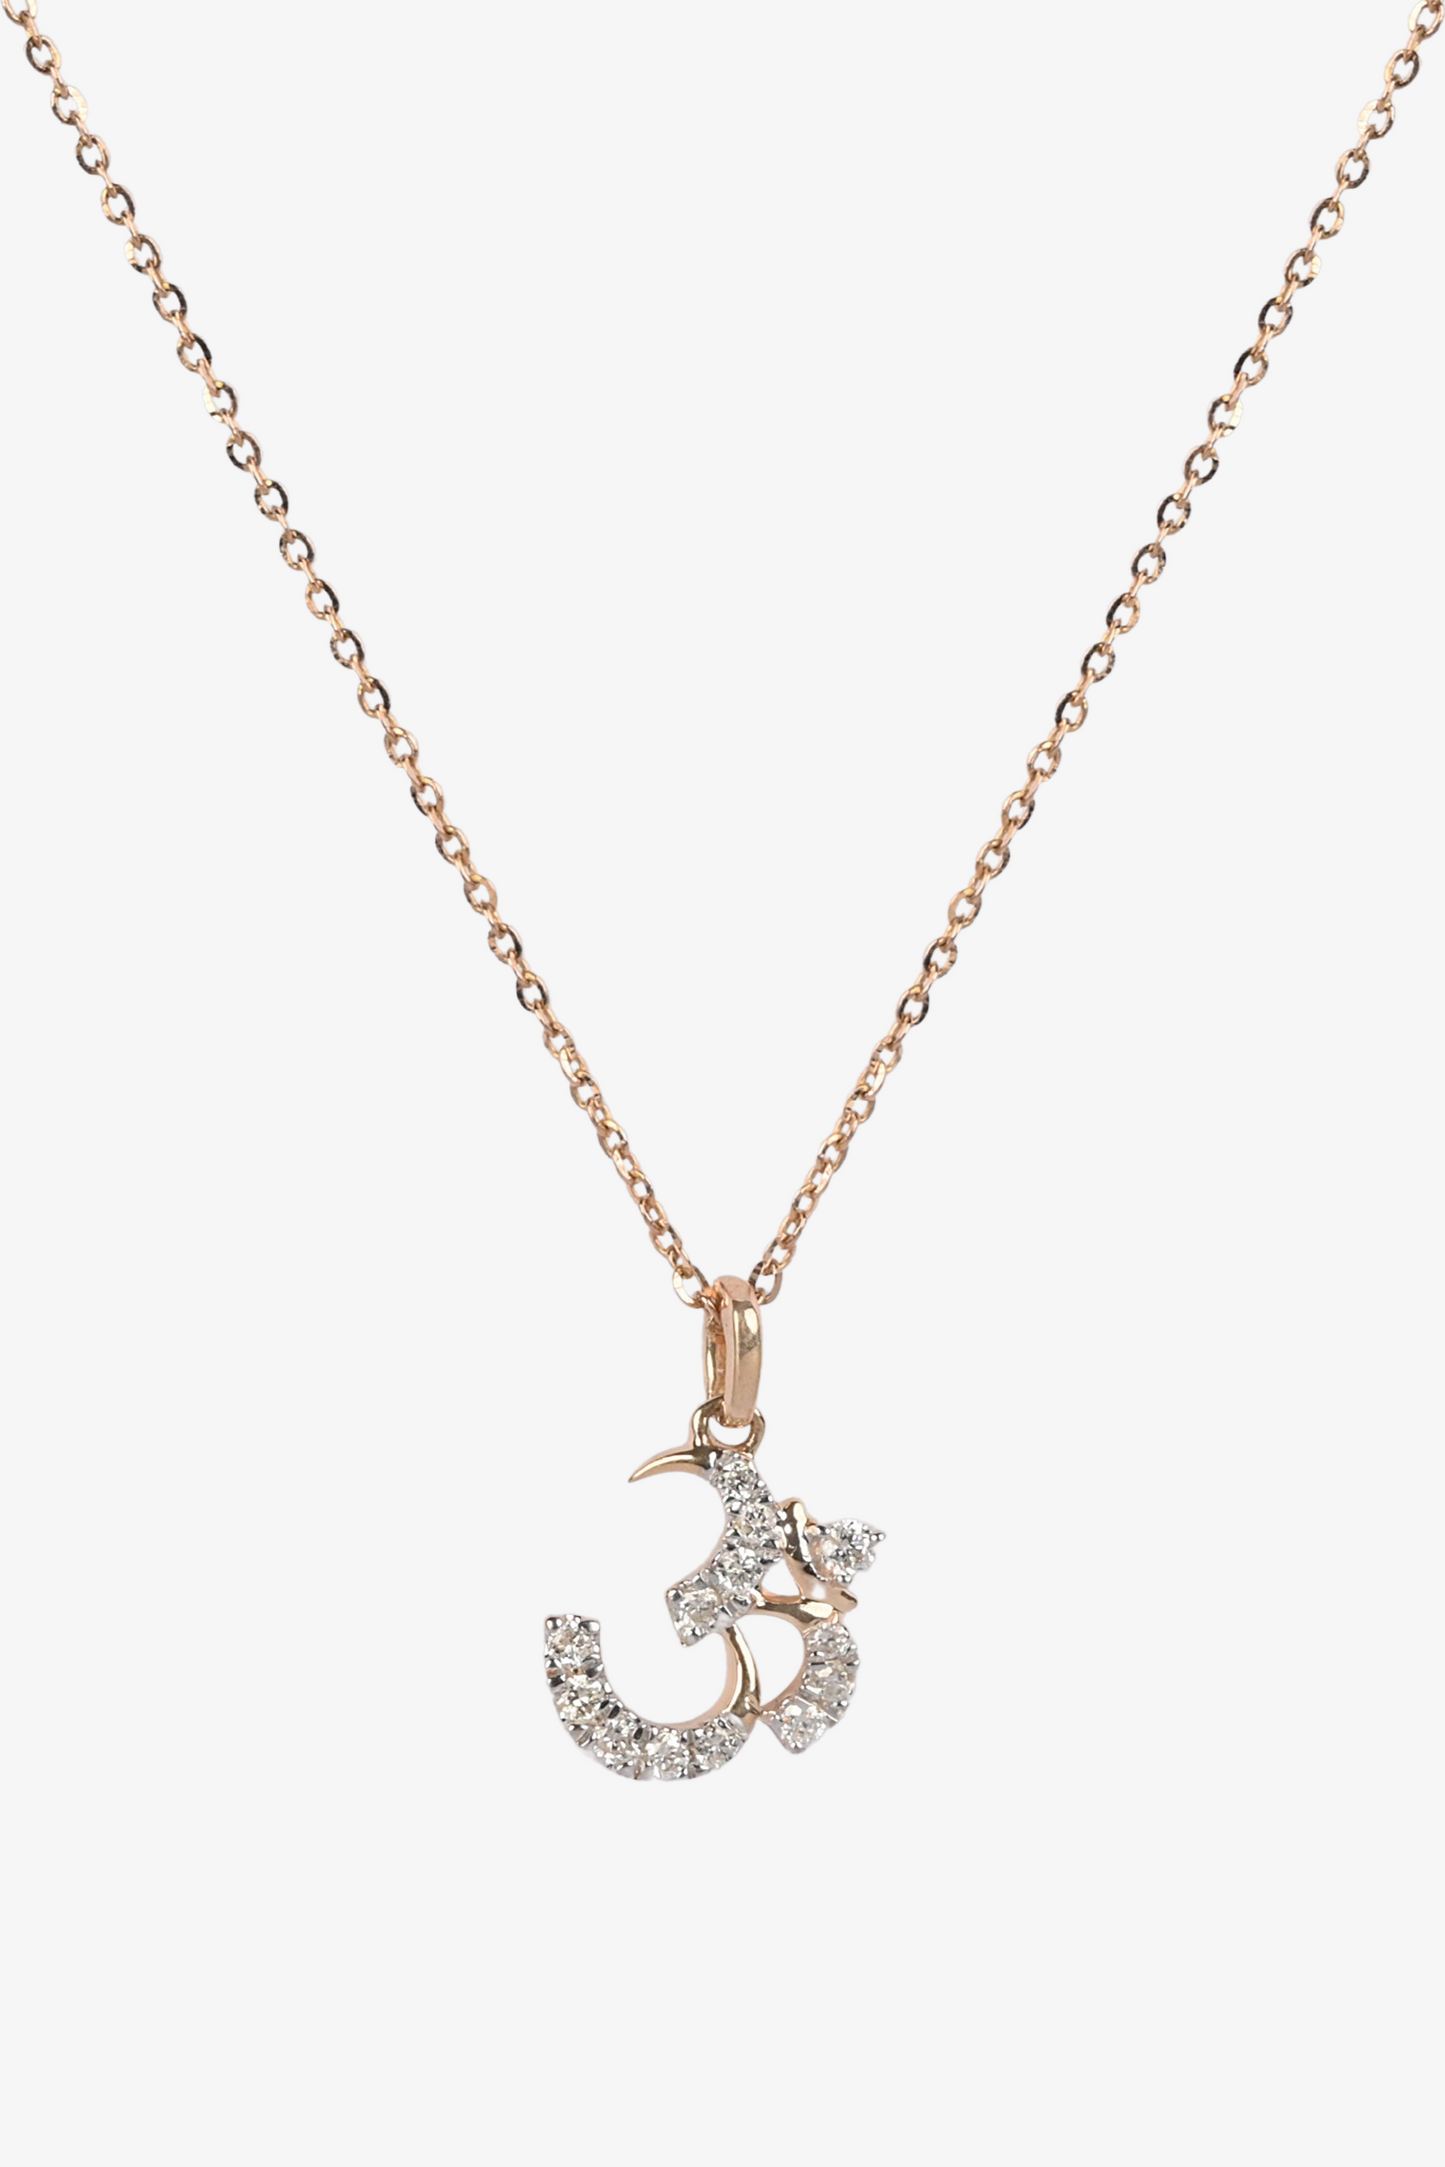 Load image into Gallery viewer, Om Necklace
